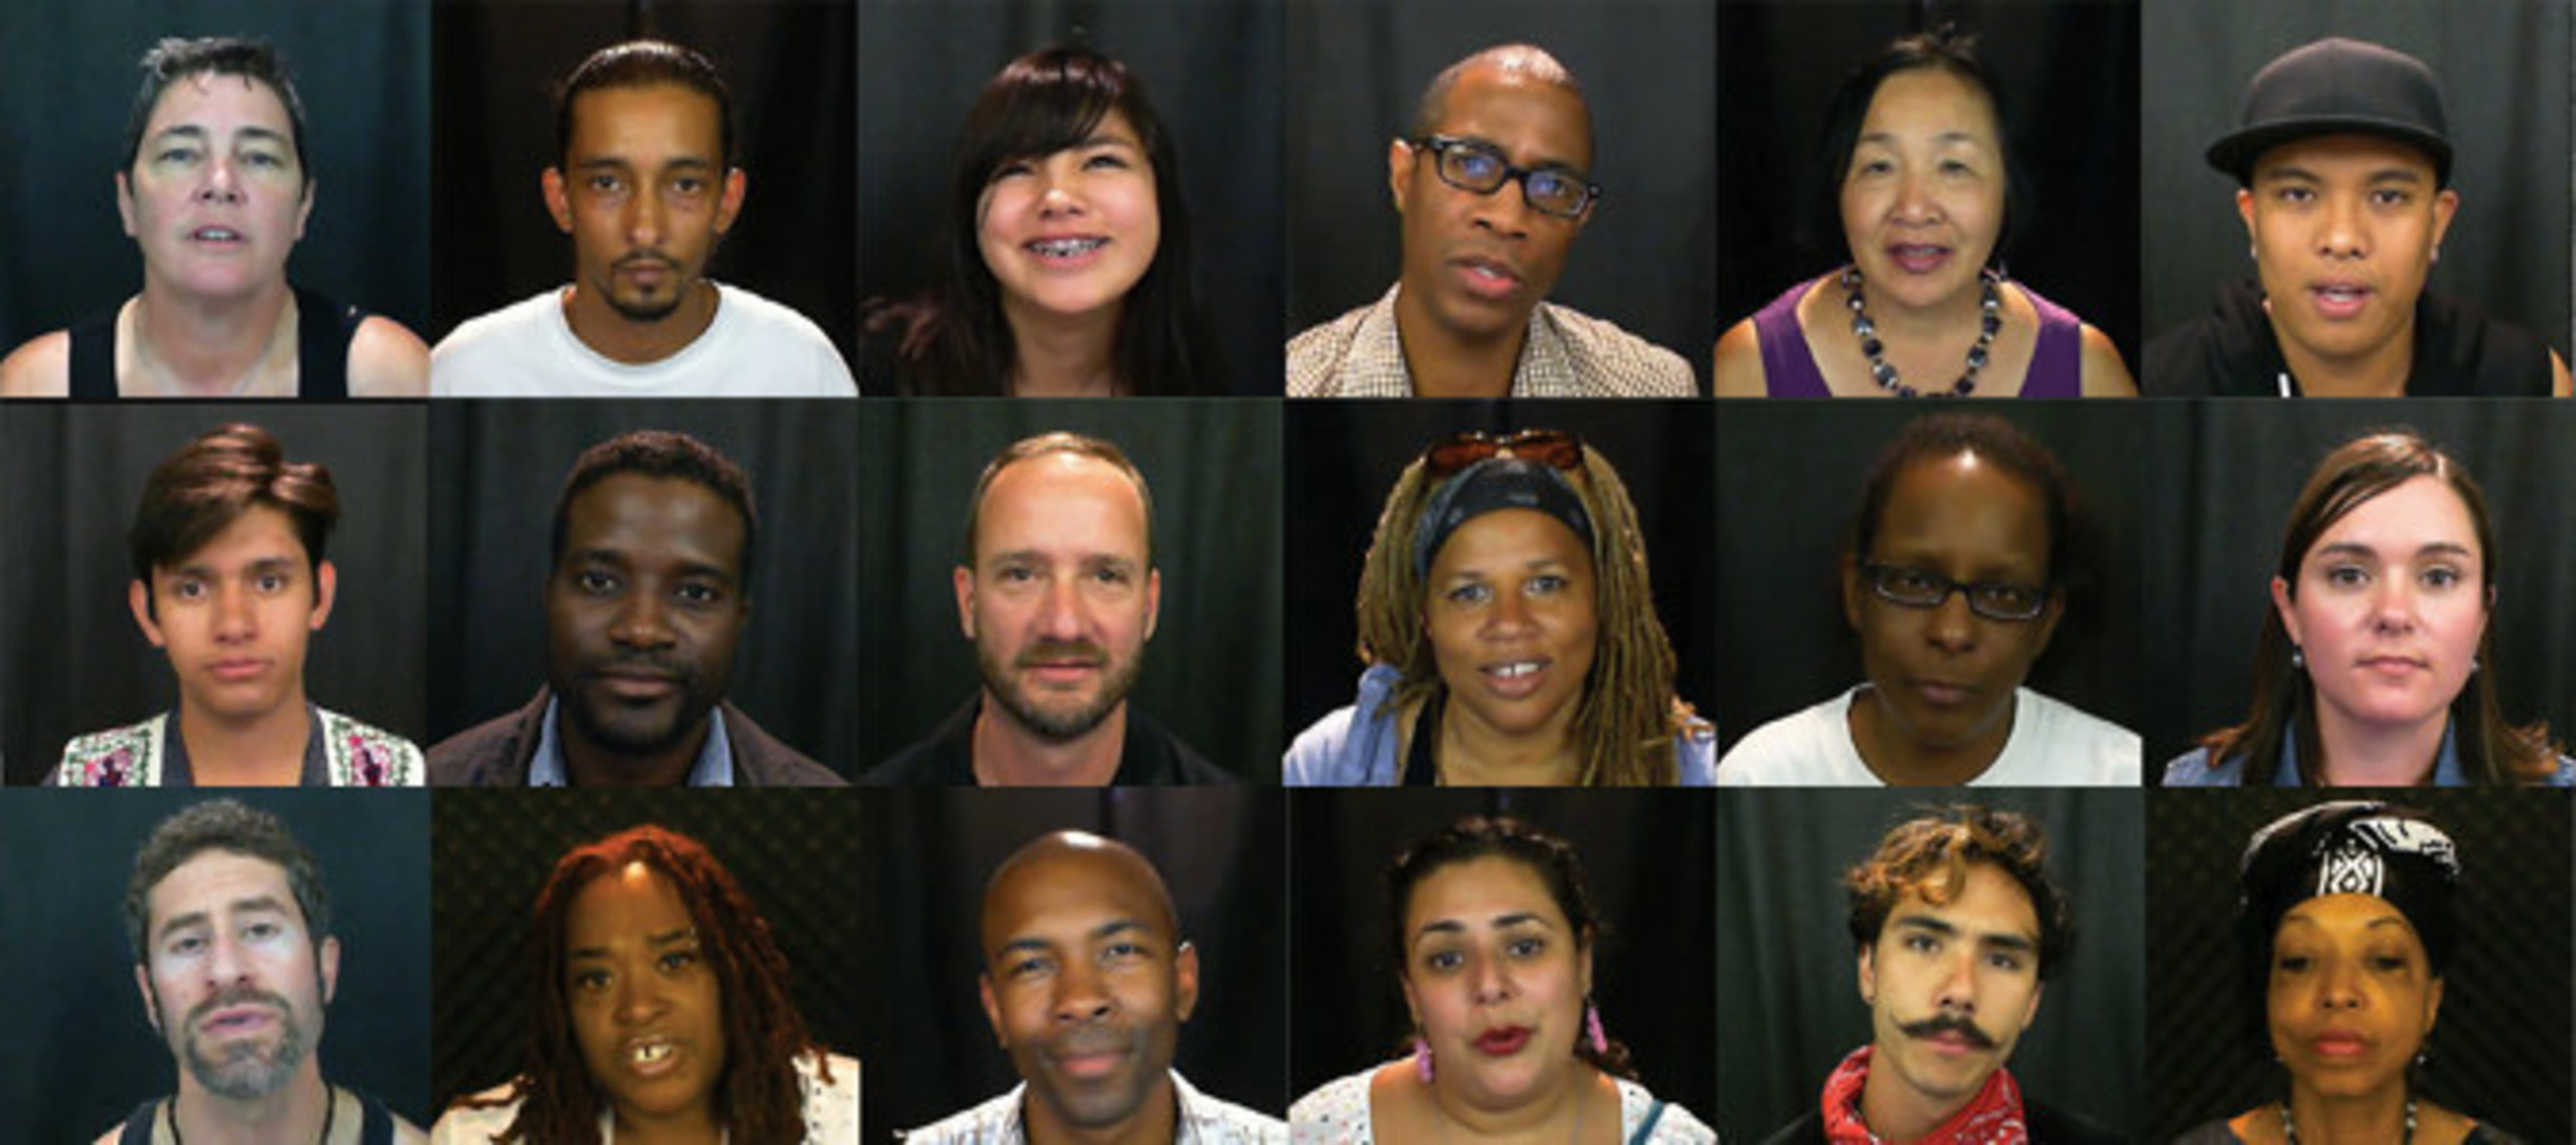 The HIV Story Project developed the concept in 2010 by creating an interactive Generations HIV Video Storytelling Booth at Under One Roof in San Francisco to record video testimonials about people's experiences with HIV/AIDS.